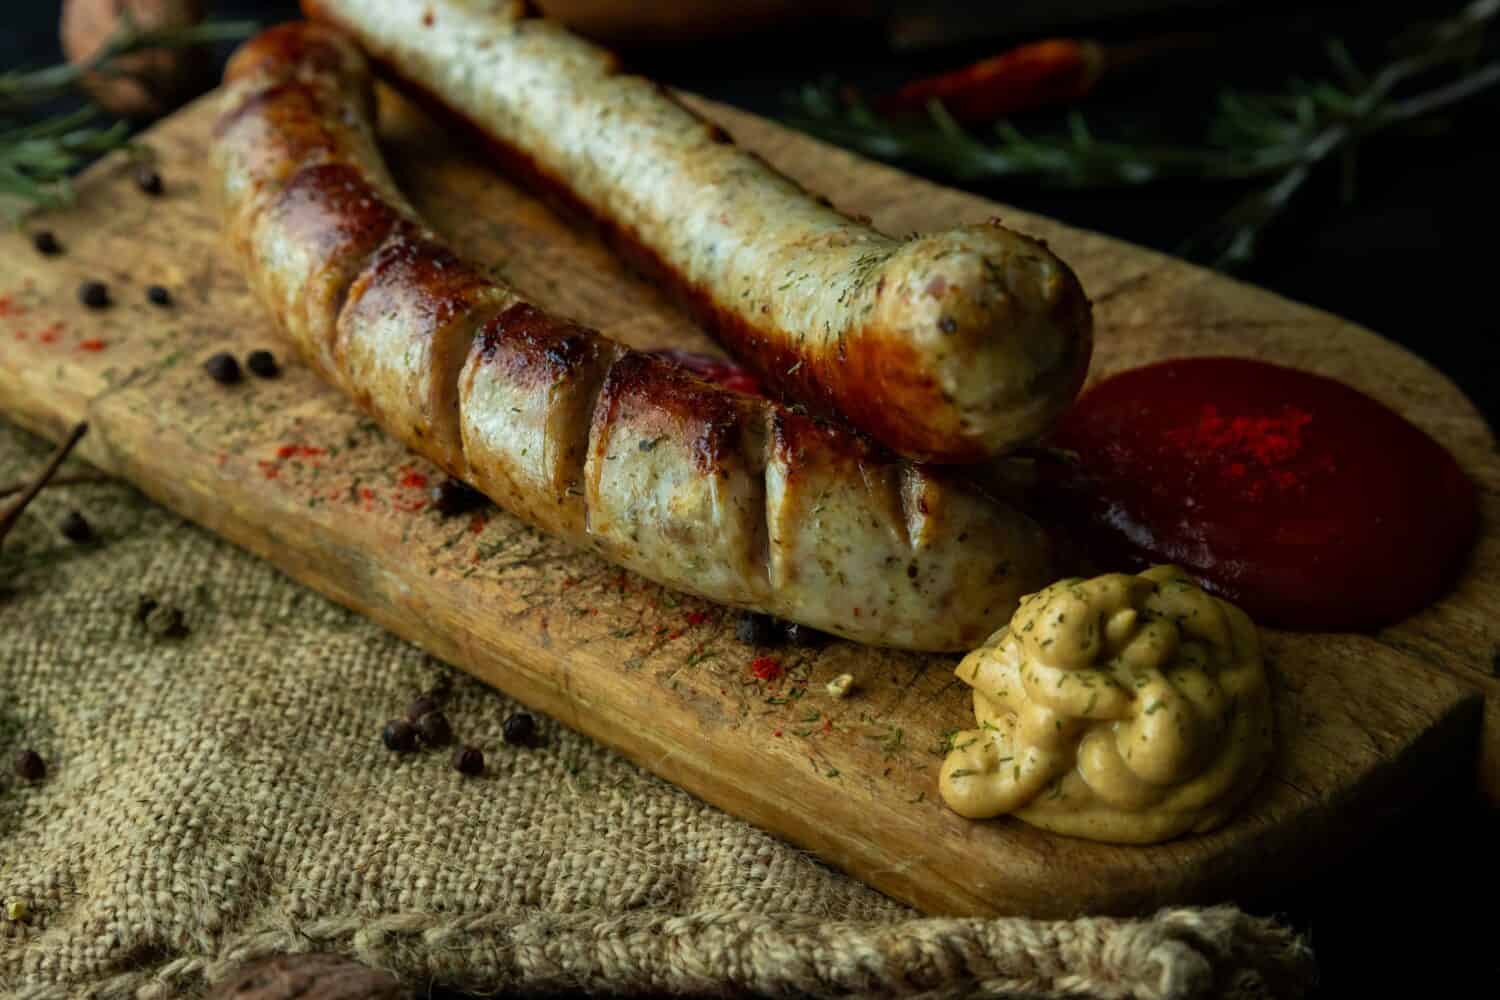 Bratwurst sausages served with mustard and herbs